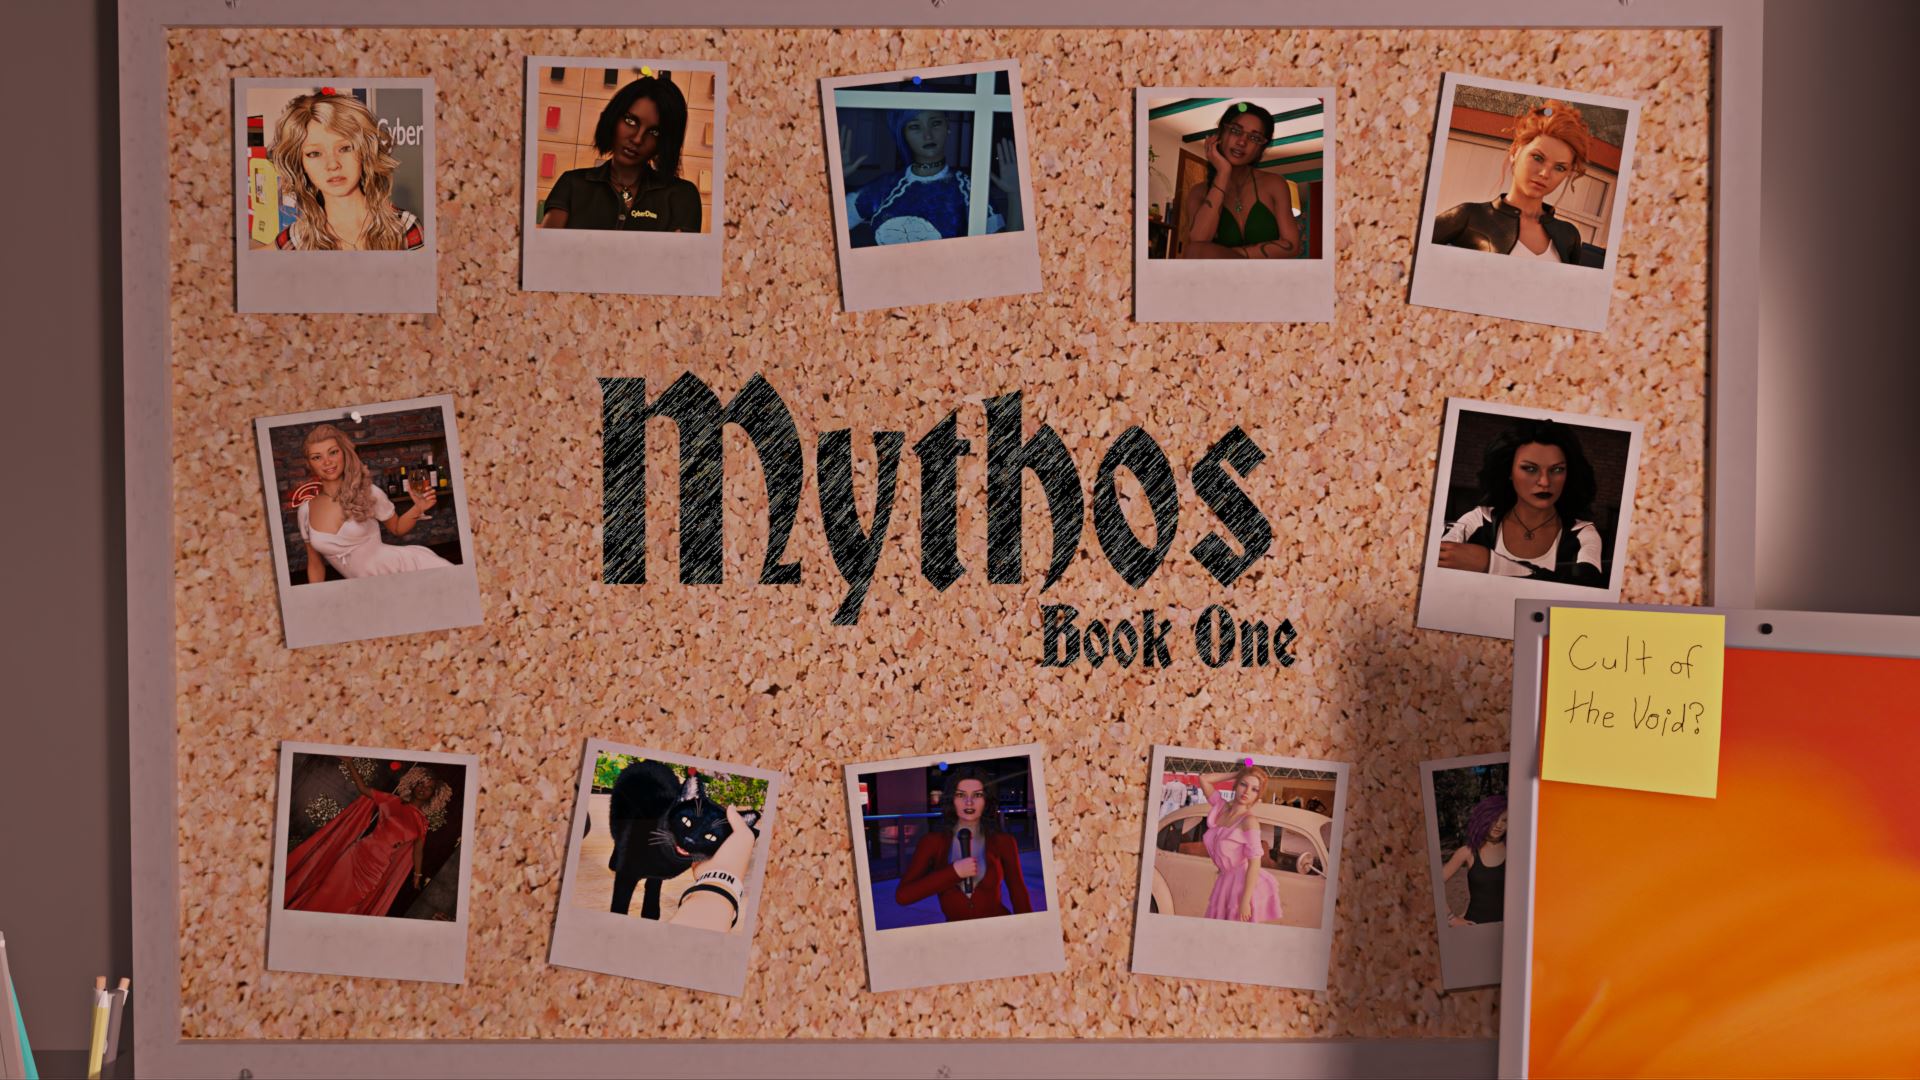 Mythos: Book One porn xxx game download cover